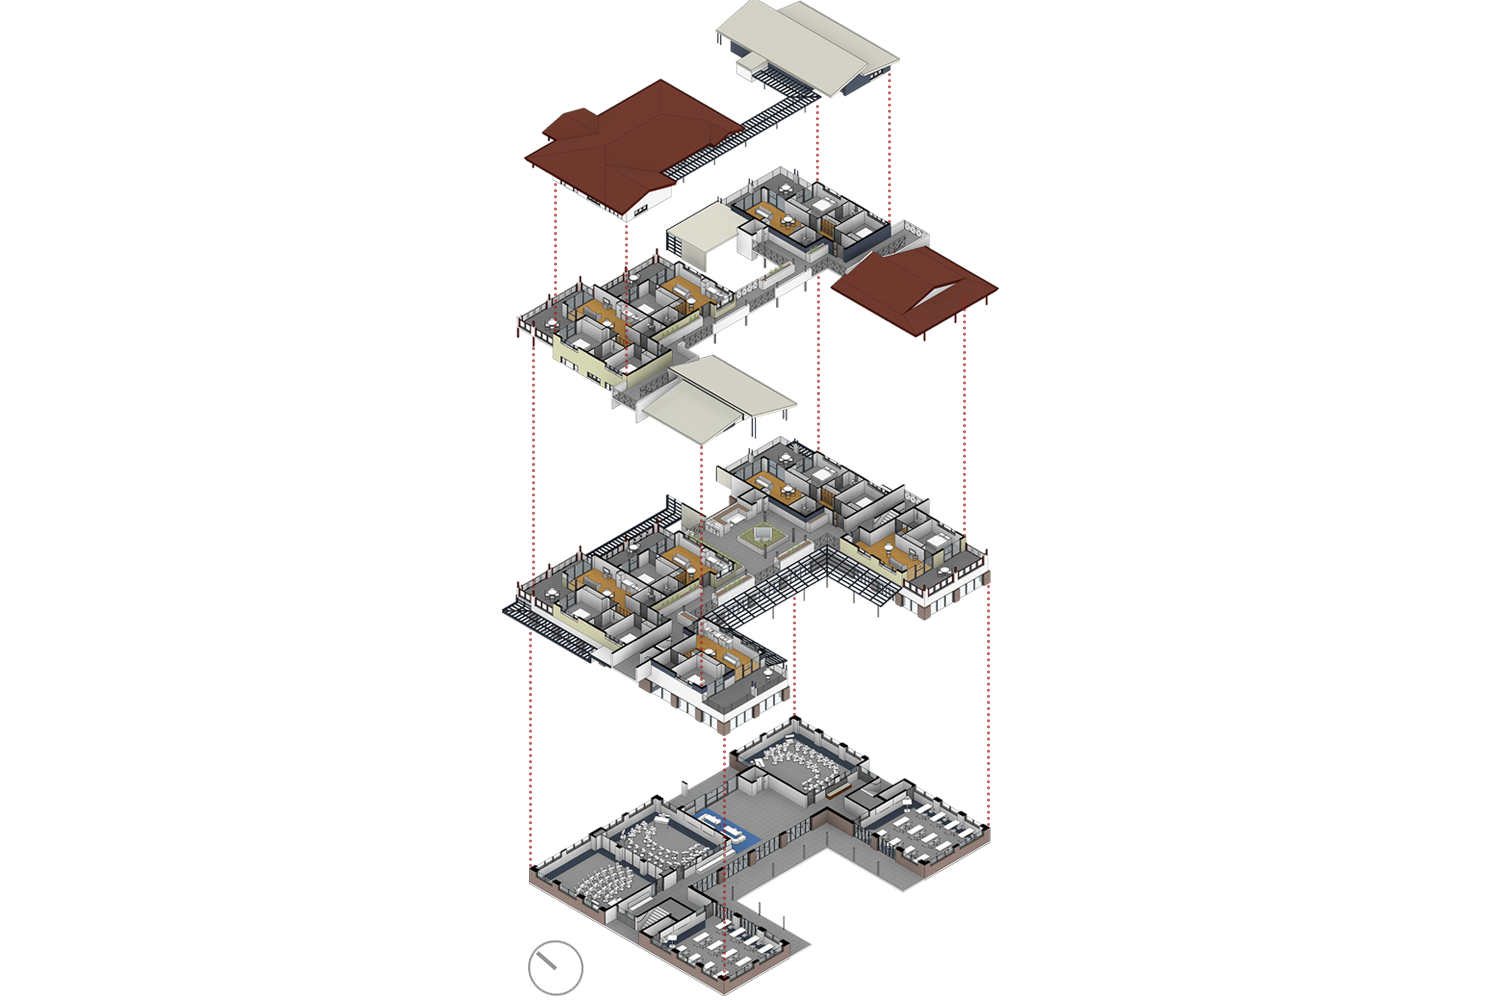 EXPLODED AXONOMETRIC VIEW